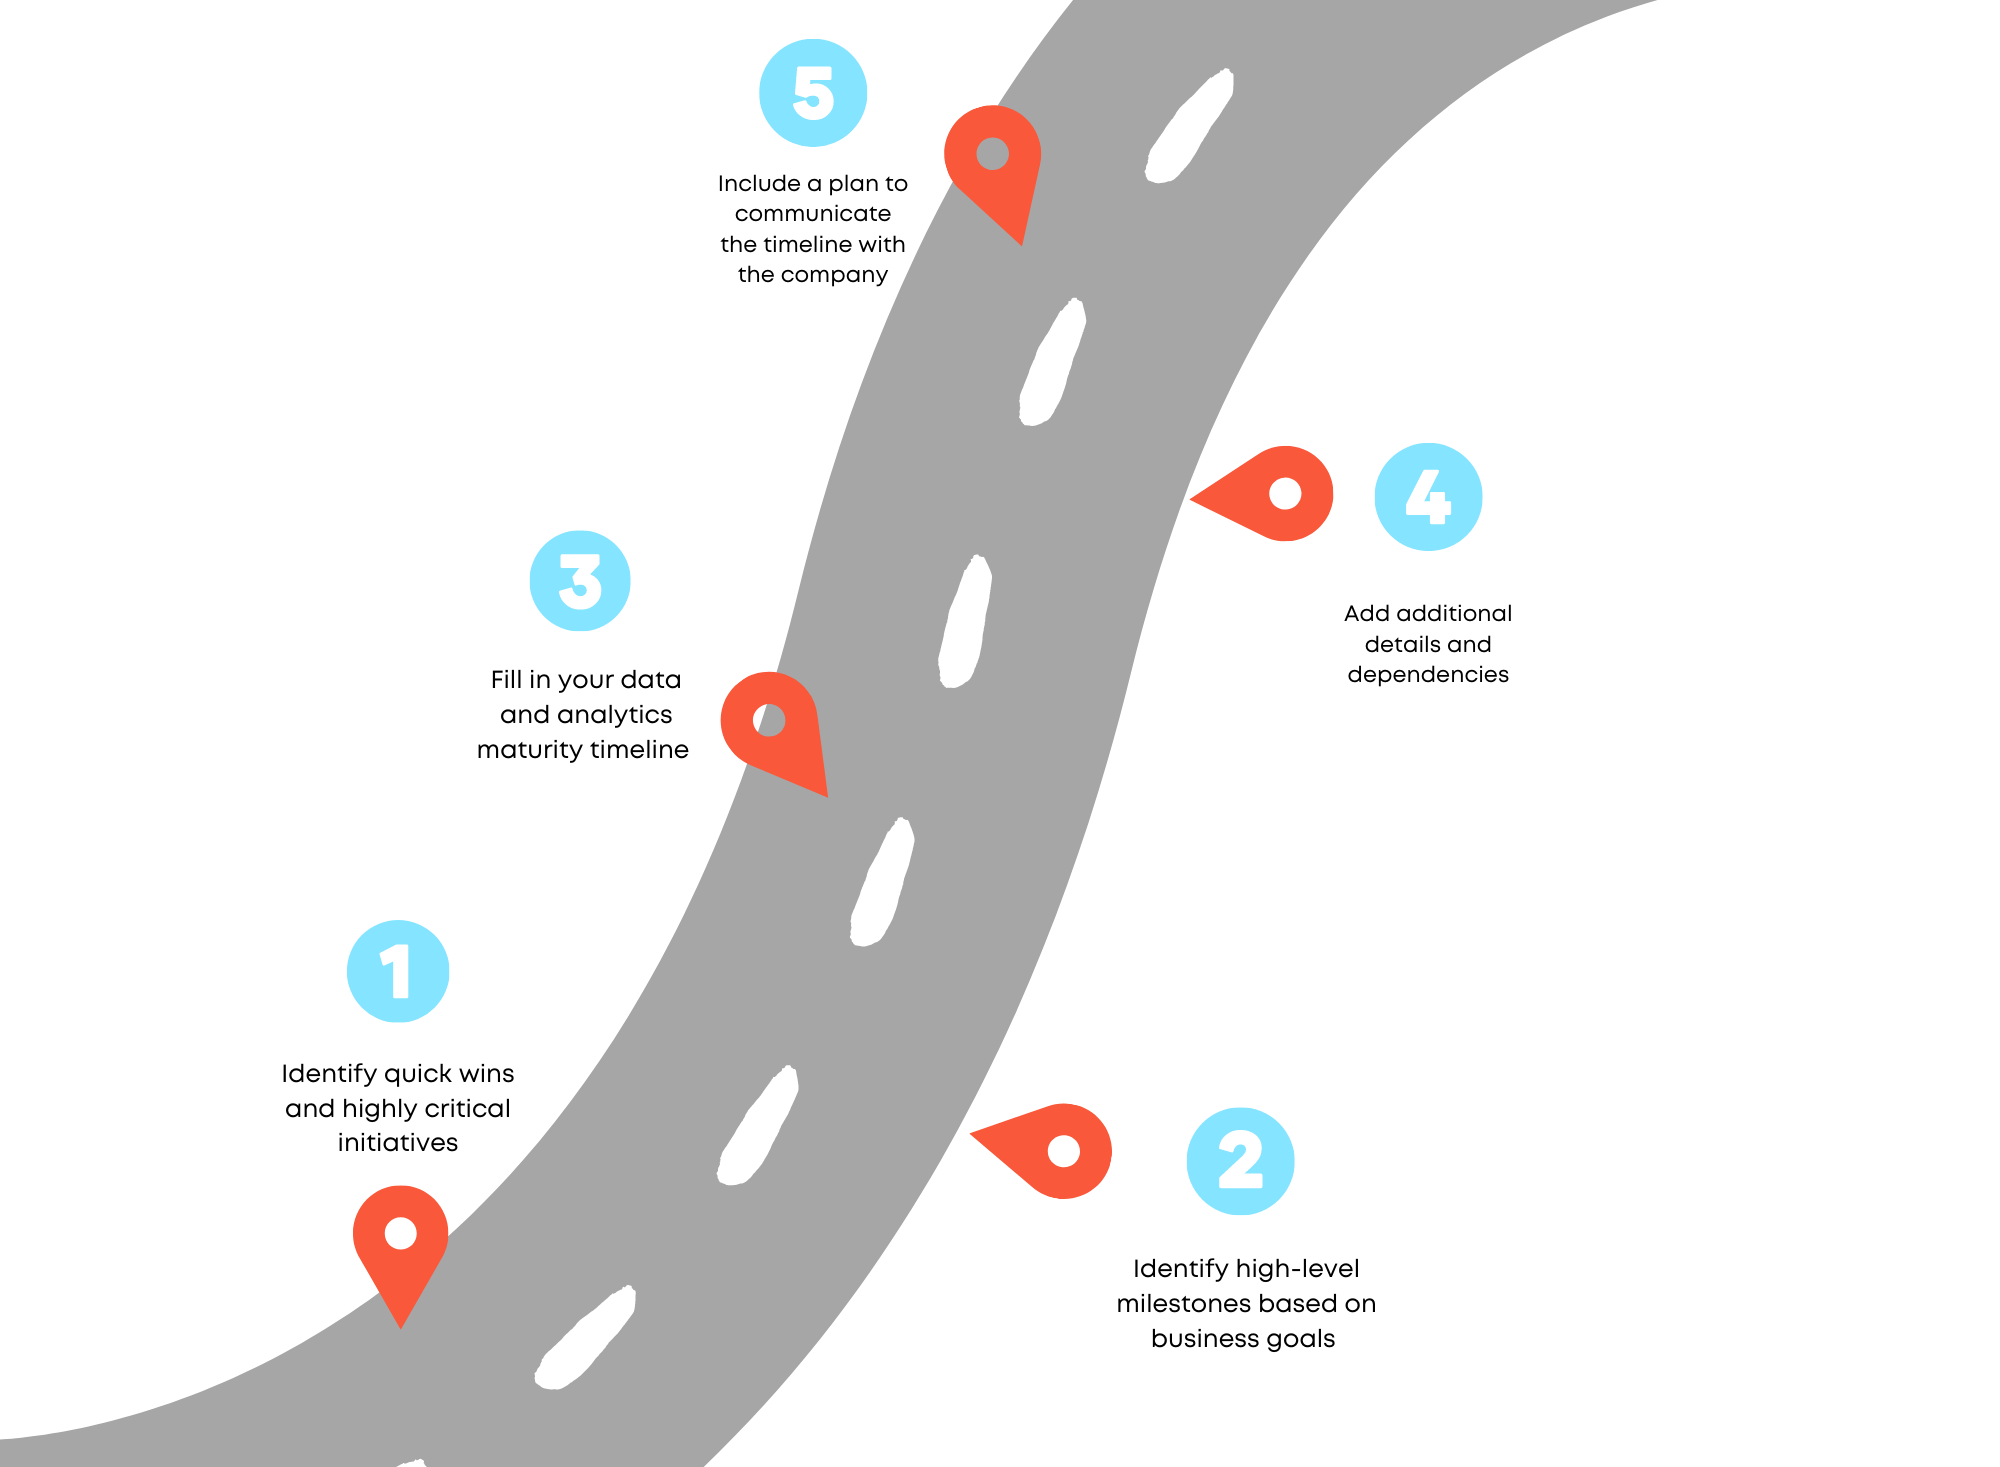 Light grey curved roadmap with orange pinpoints and numbers from one to five placed scattered on the road with black text under each. Text states five elements of a data strategy roadmap.